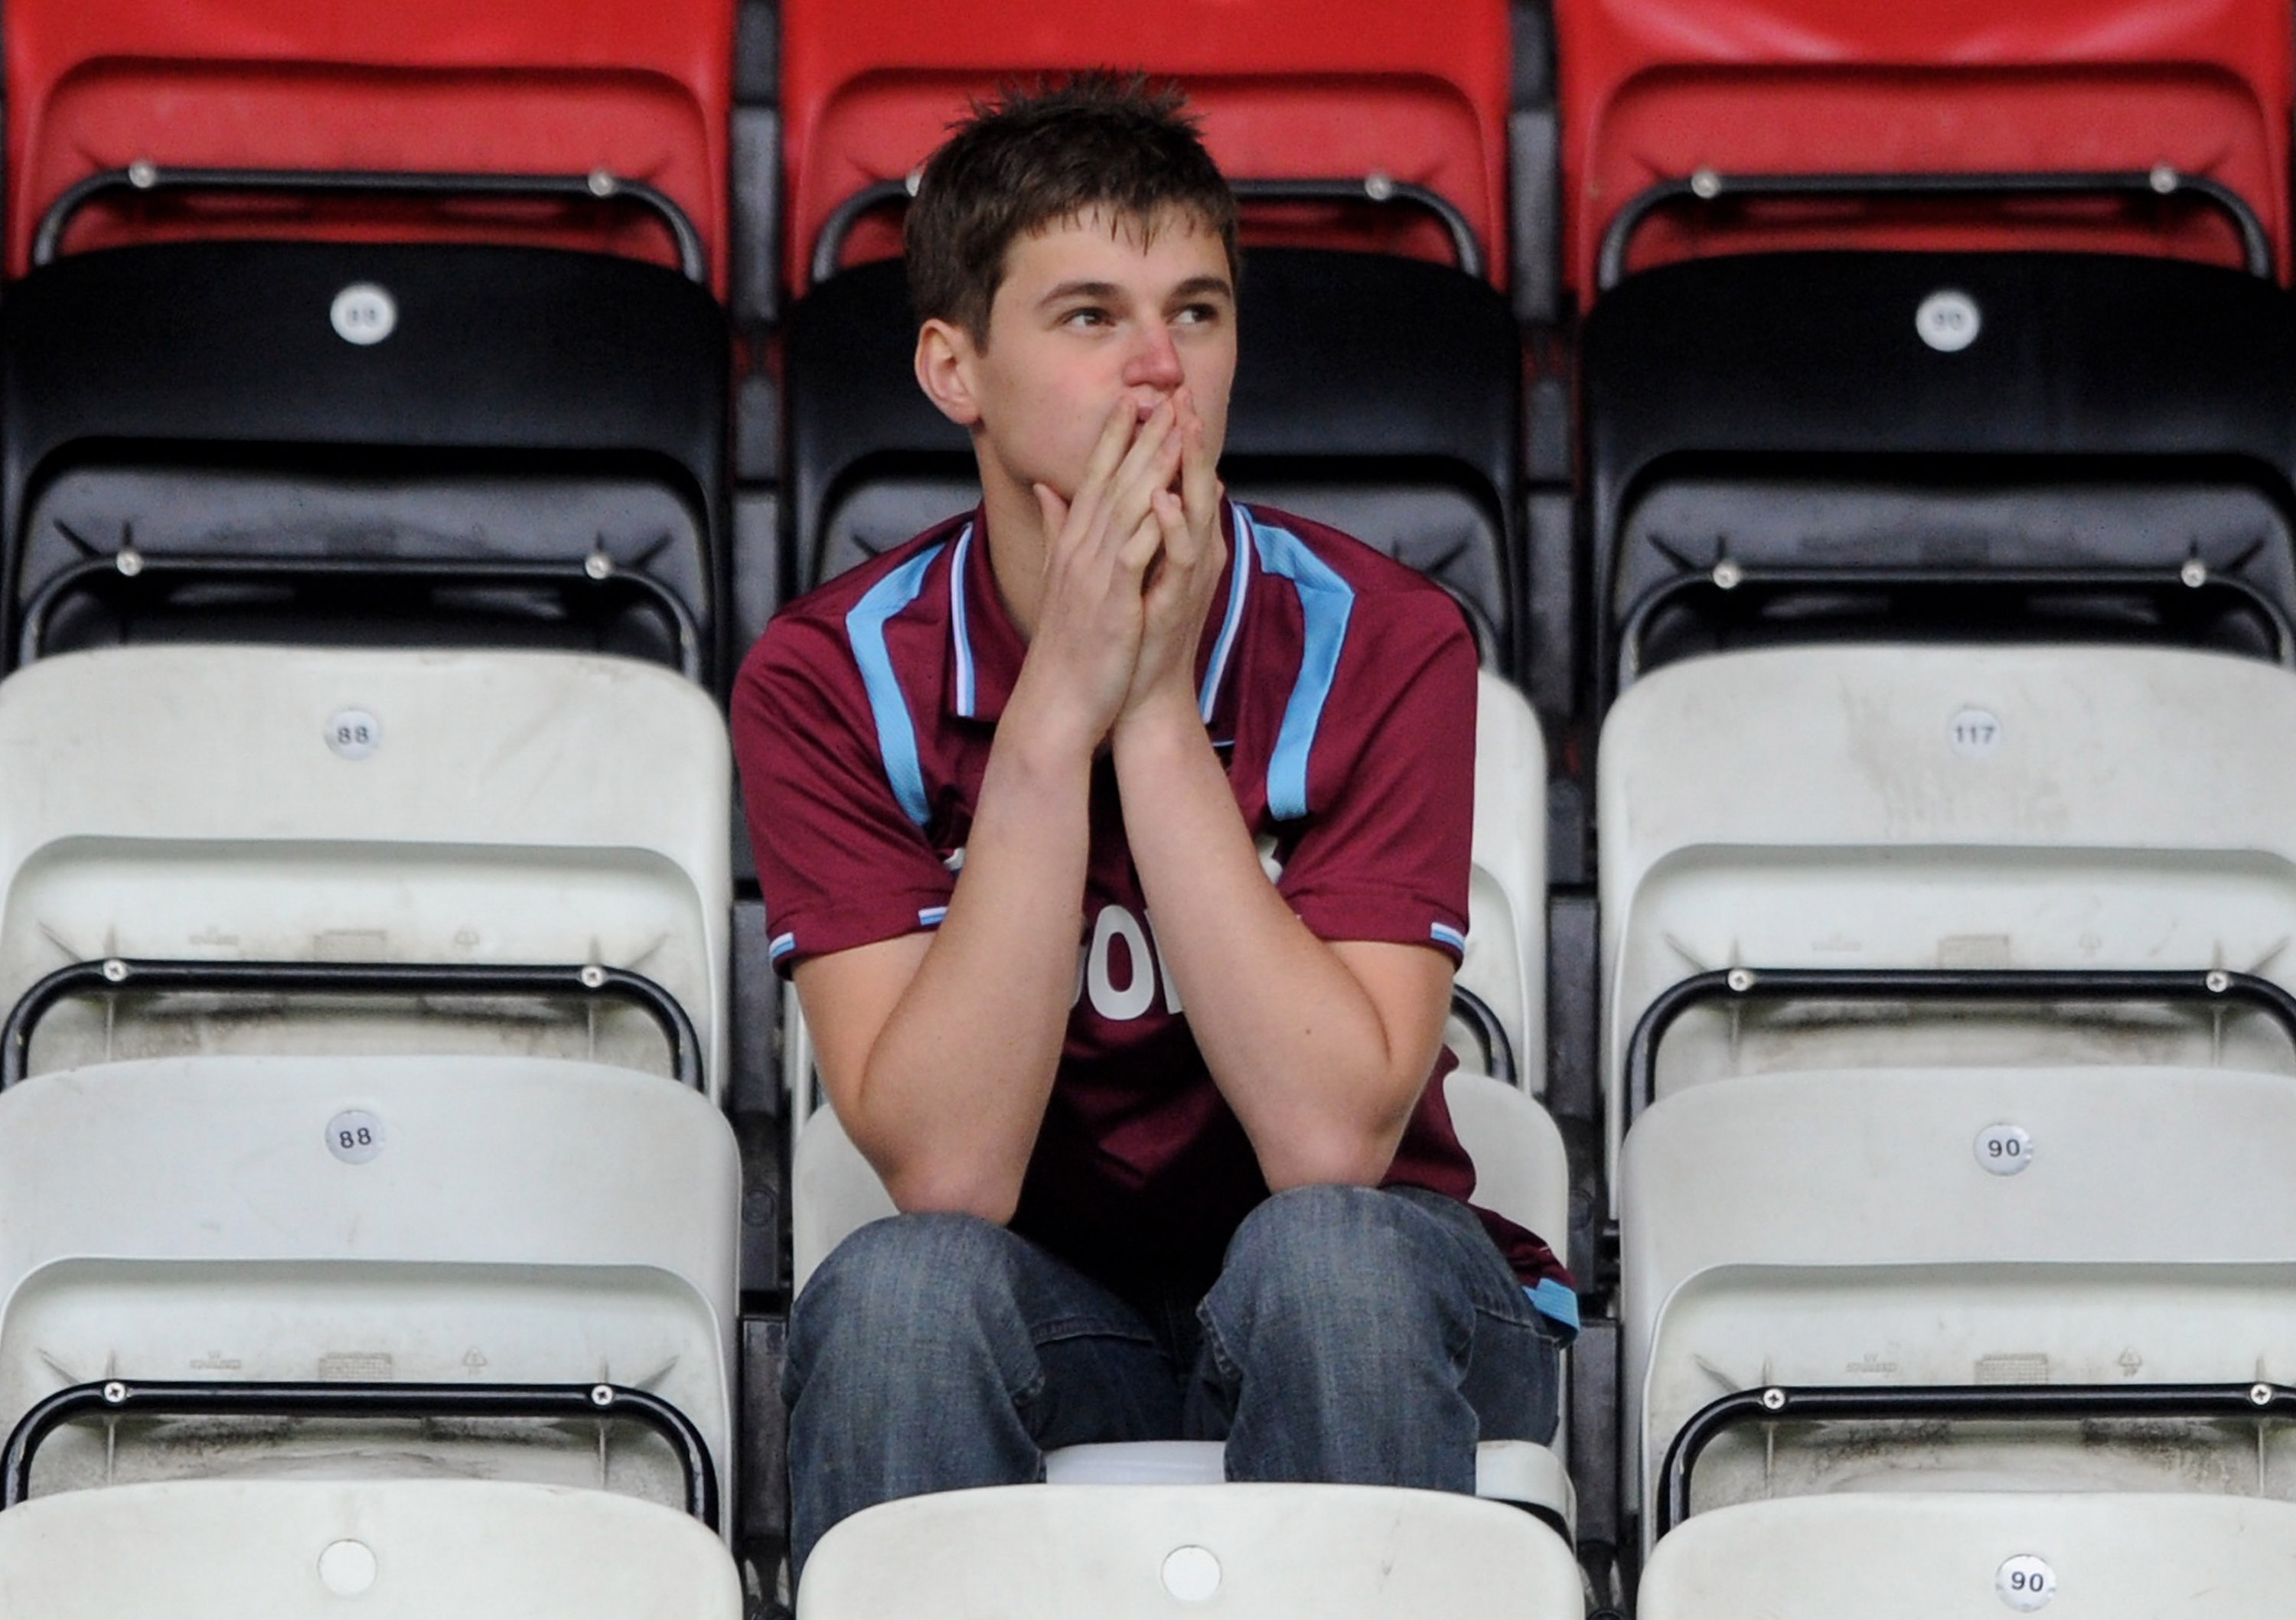 WIGAN, ENGLAND - MAY 15:  A West Ham United fan looks dejected following his team's relegation at the end of the Barclays Premier League match between Wigan Athletic and West Ham United at the DW Stadium on May 15, 2011 in Wigan, England.  (Photo by Chris